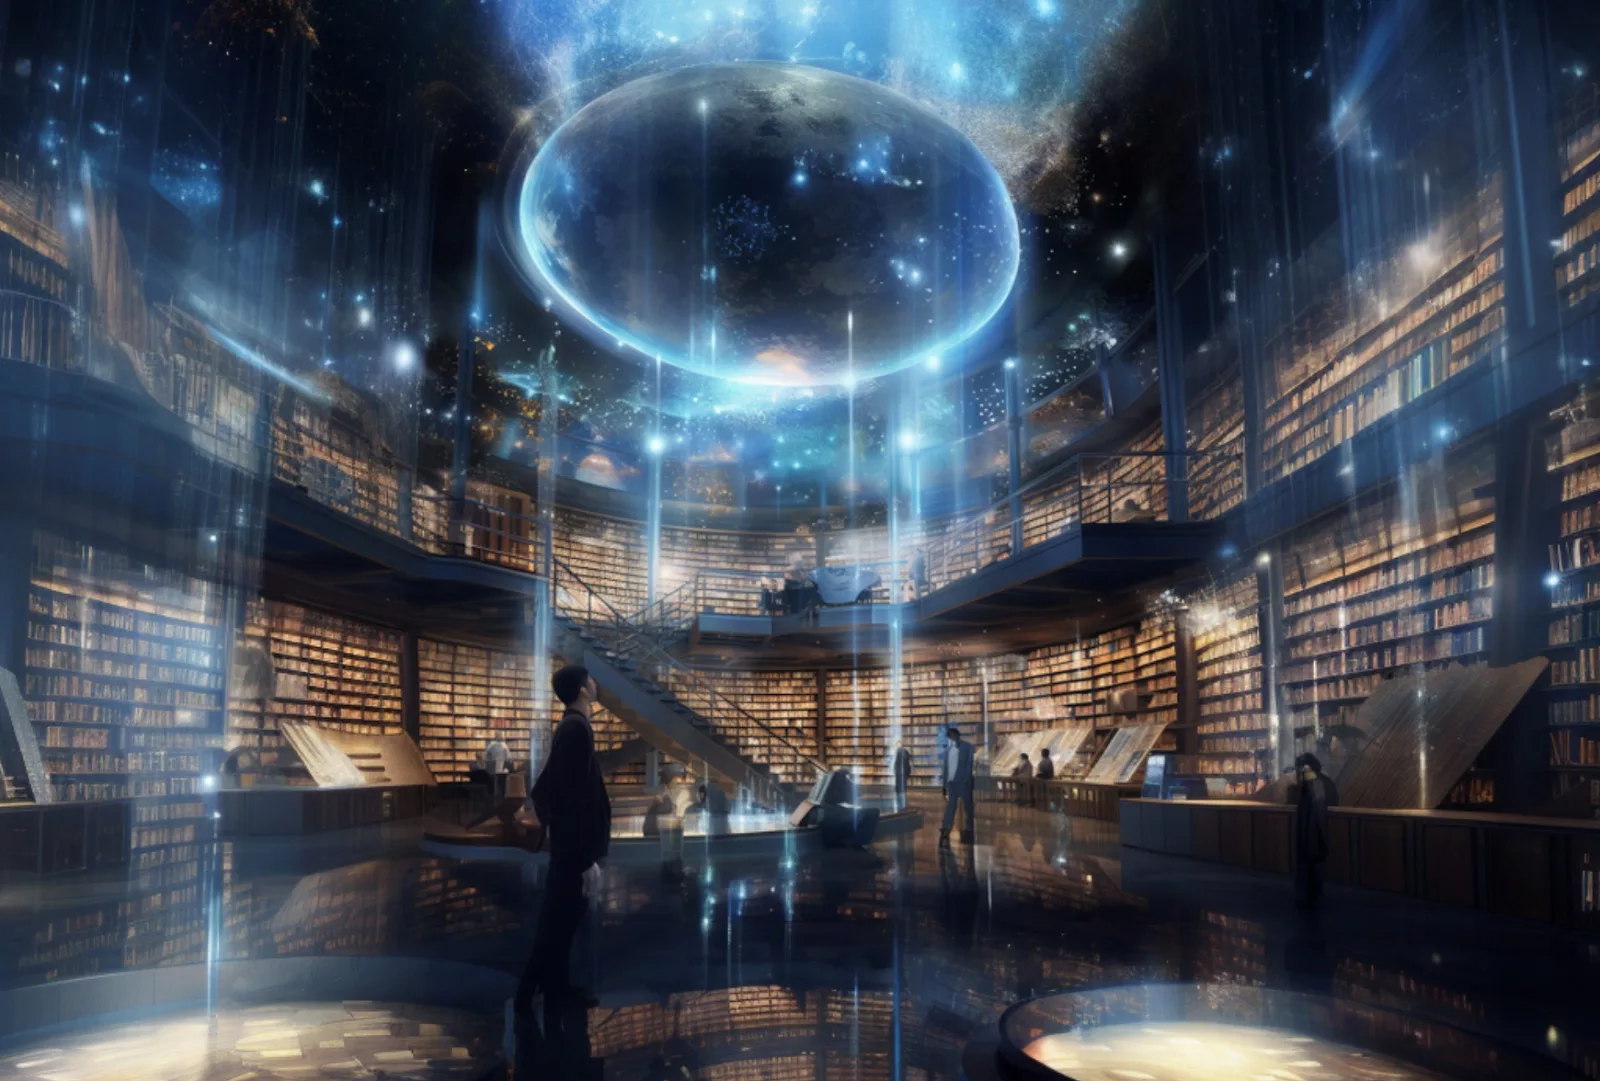 Digital global data concept, library with a glowing earth image on the ceiling